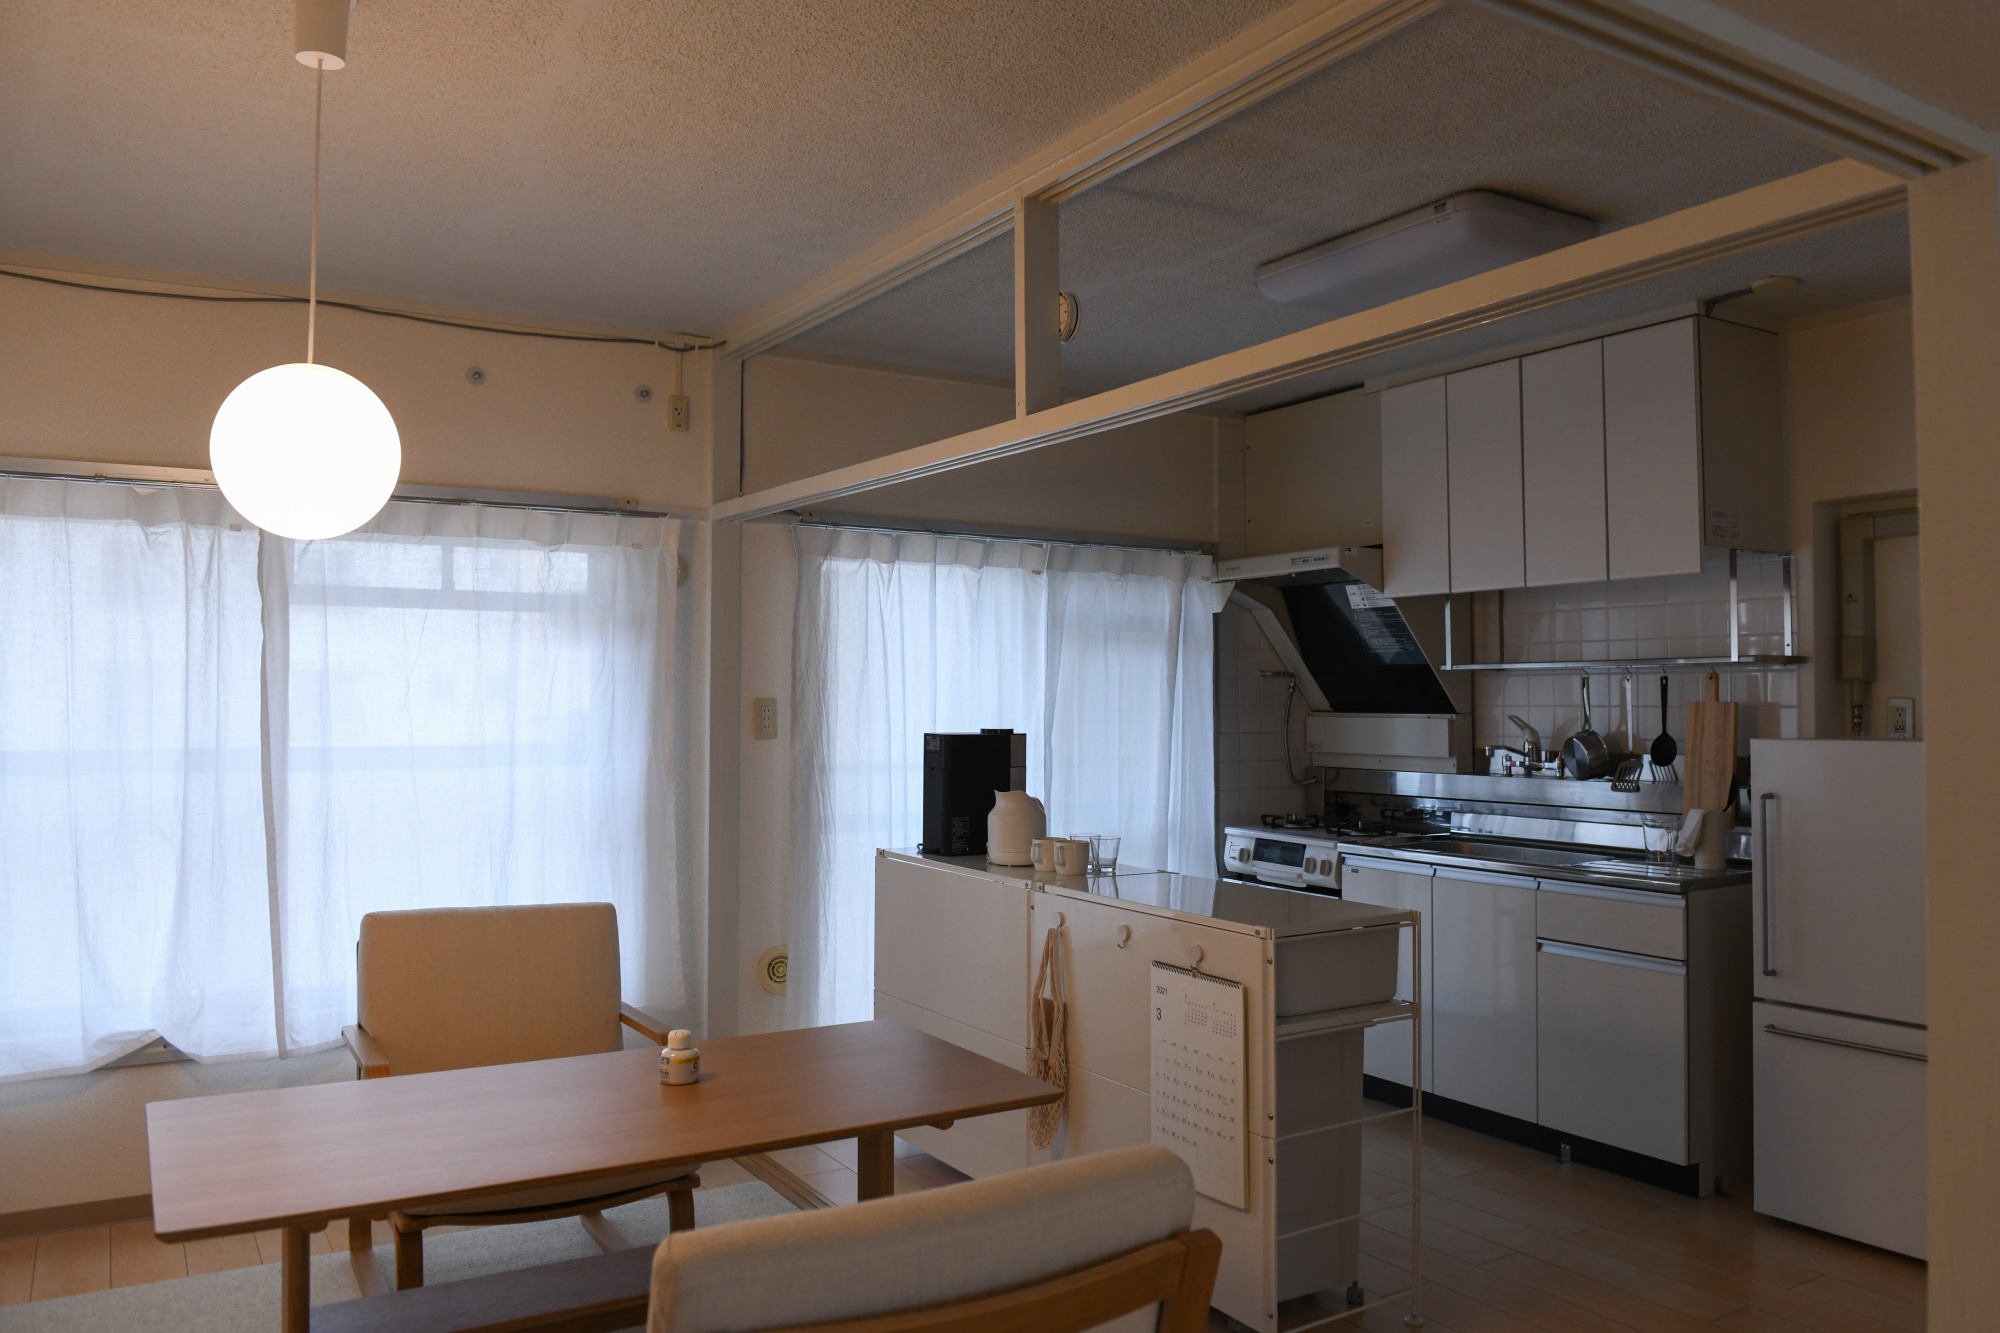 A Crash Course In The Japanese Home And Kitchen - Savvy Tokyo